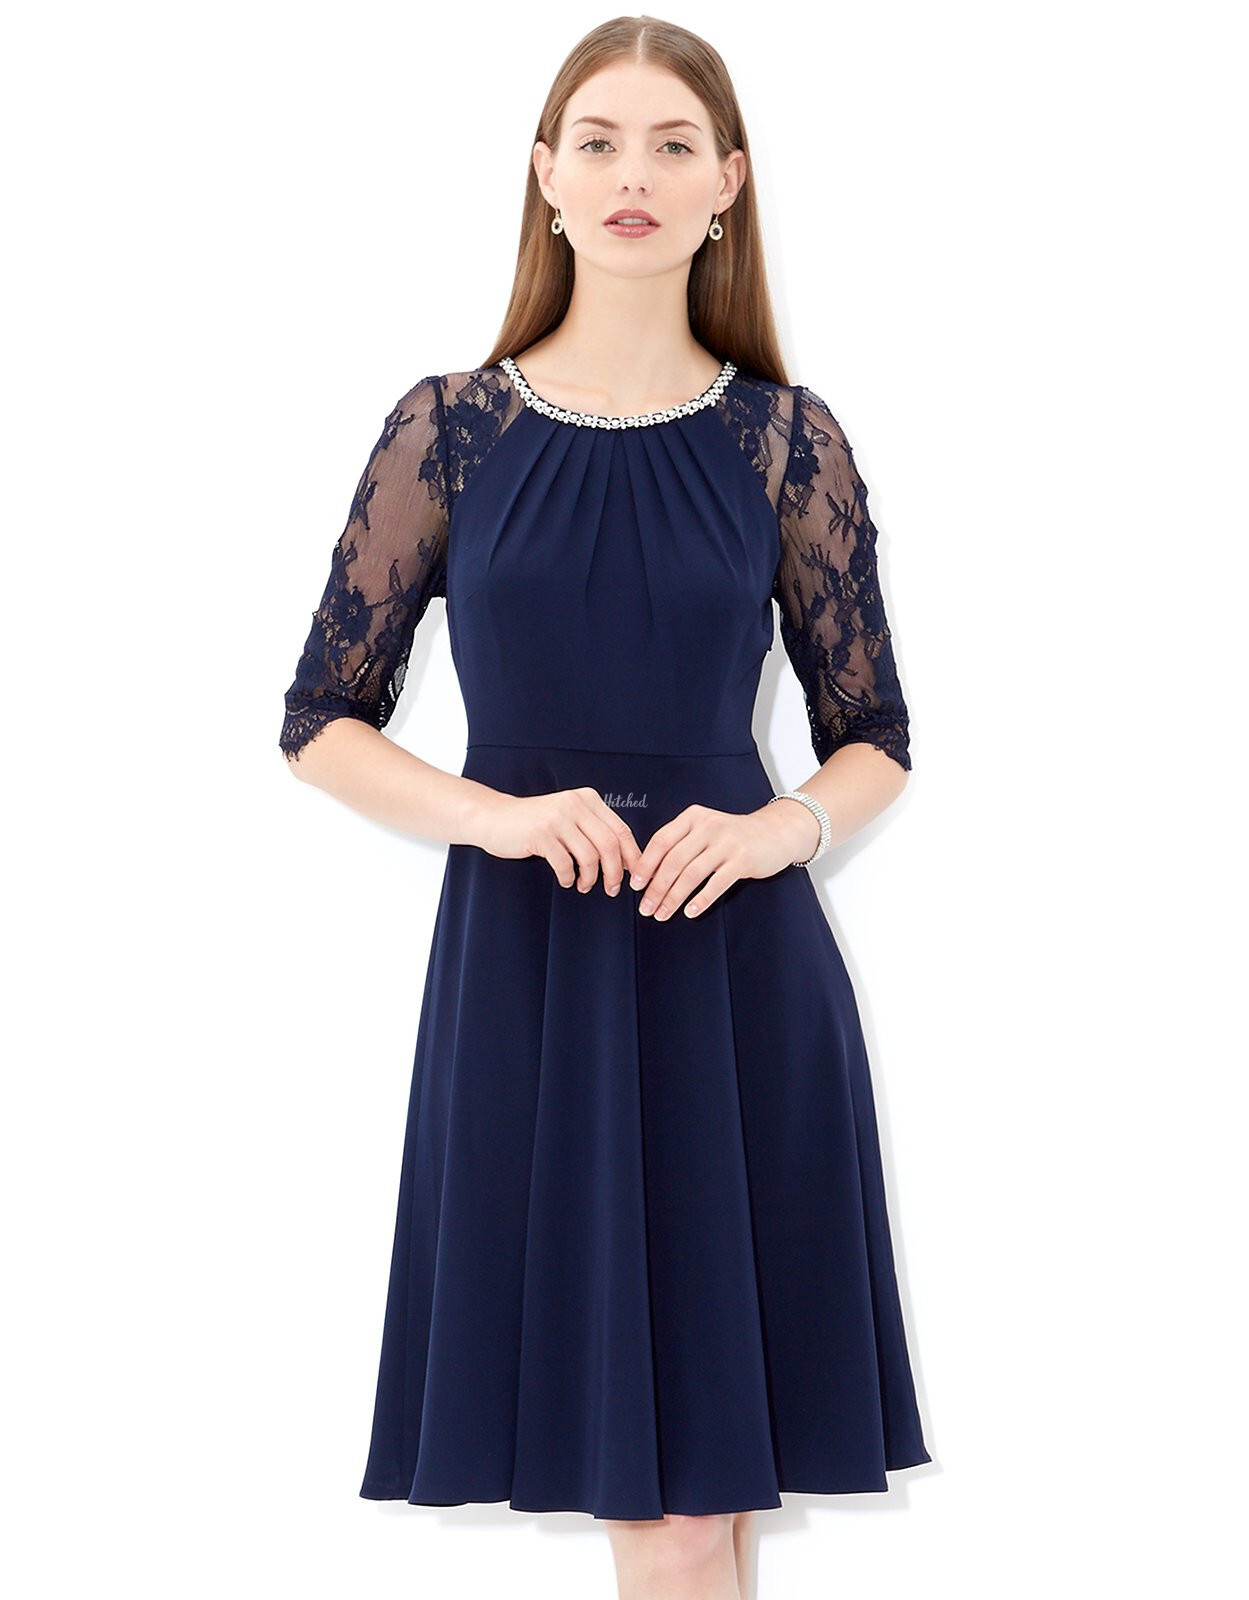 Kaitlin Dress in Navy Bridesmaid Dress from Monsoon Accessories ...